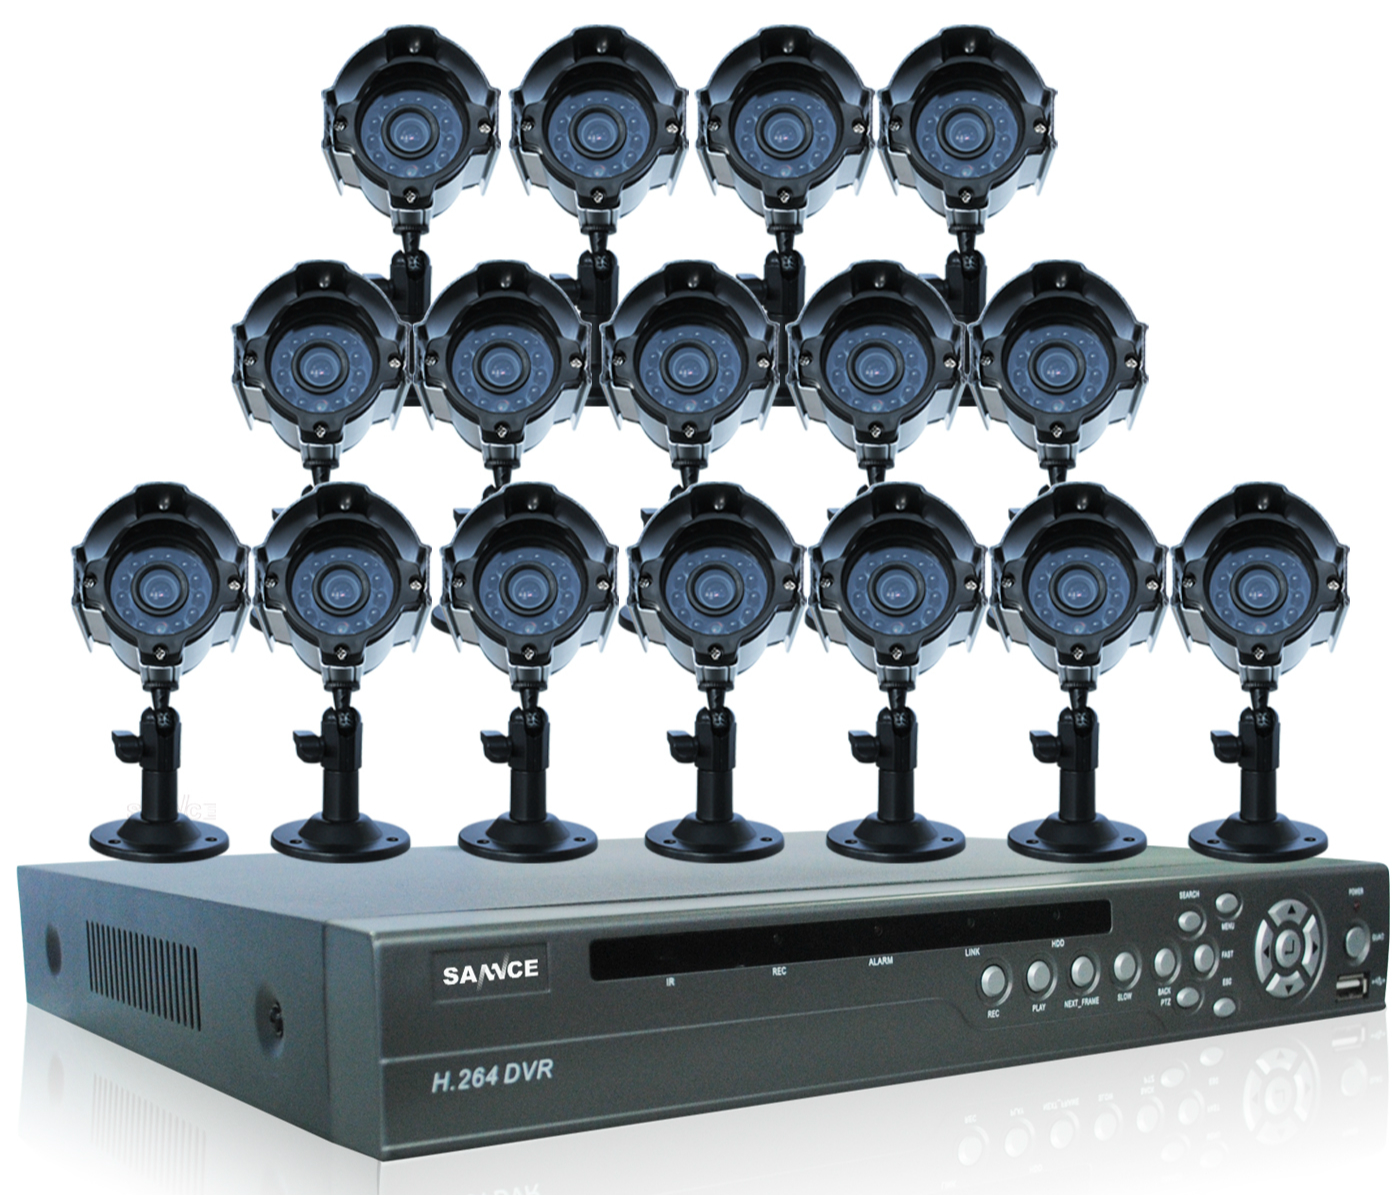 KGuard KG OT801 4HW227A 500G 8 Channel DVR Security System & 4 Cameras 600 TVL with Smartphone and Tablet Remote viewing